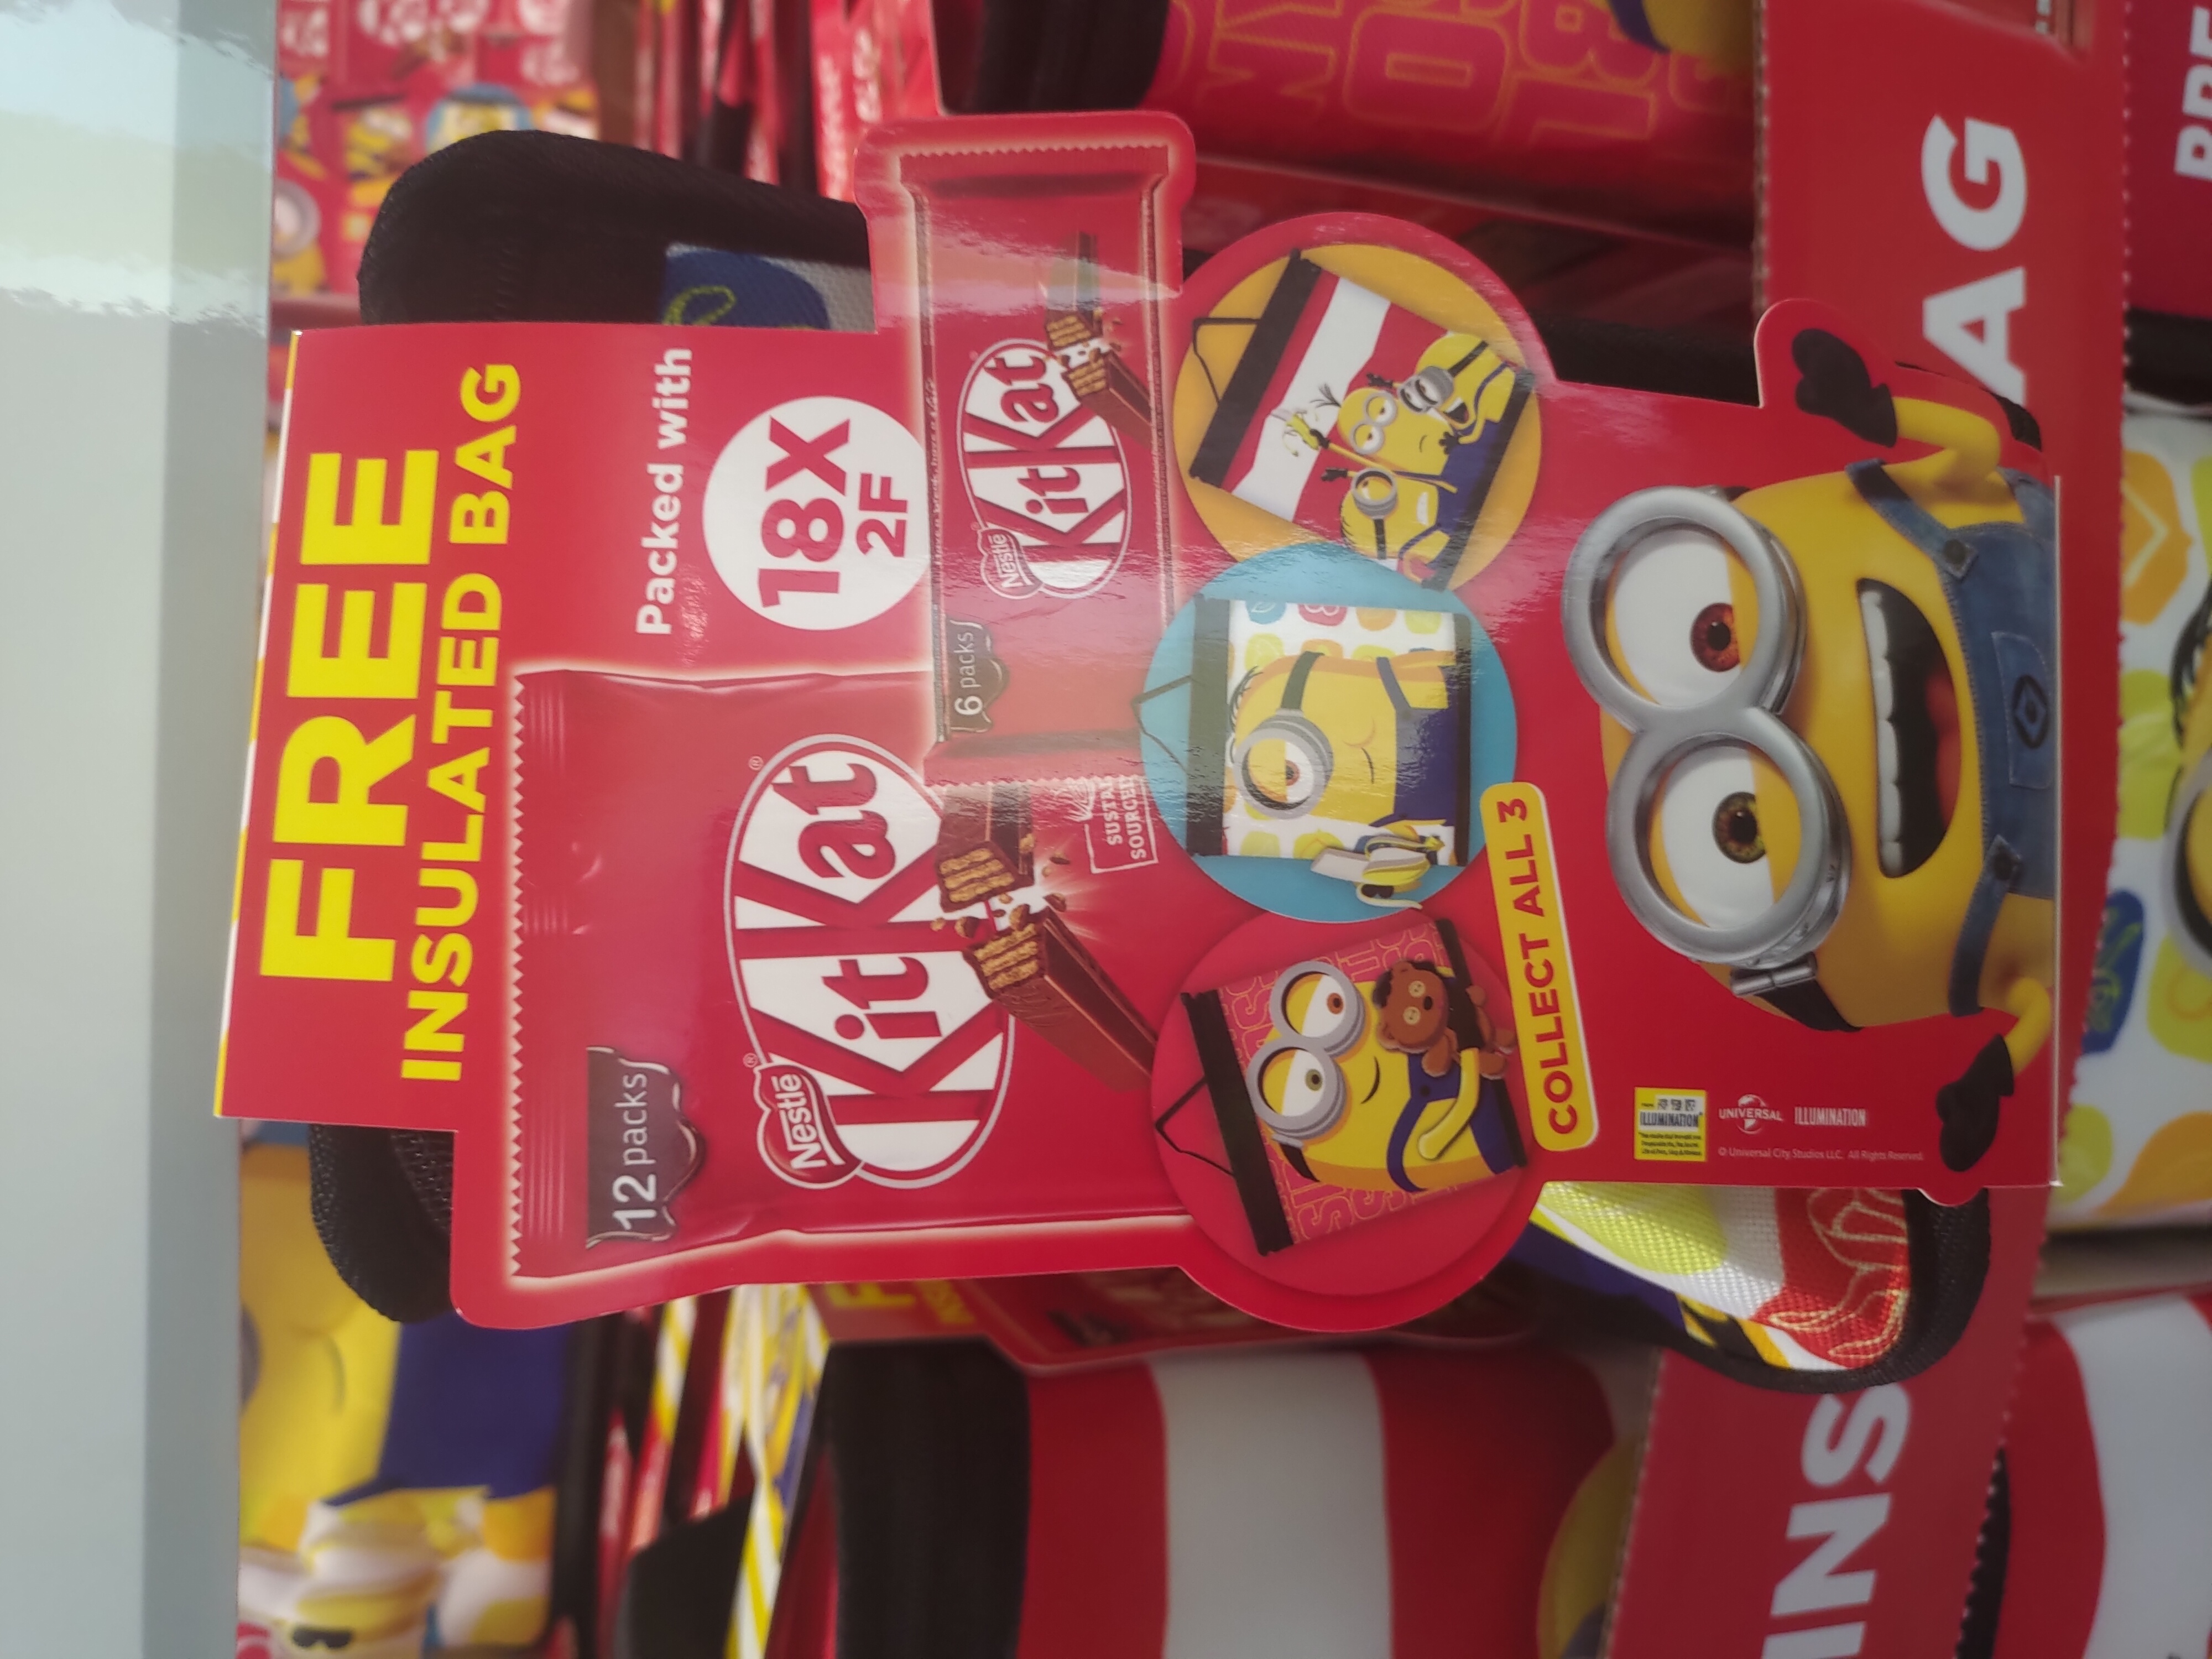 Free Limited Edition Minion Cooler Bag when you purchase Kit Kat at FairPrice - 2